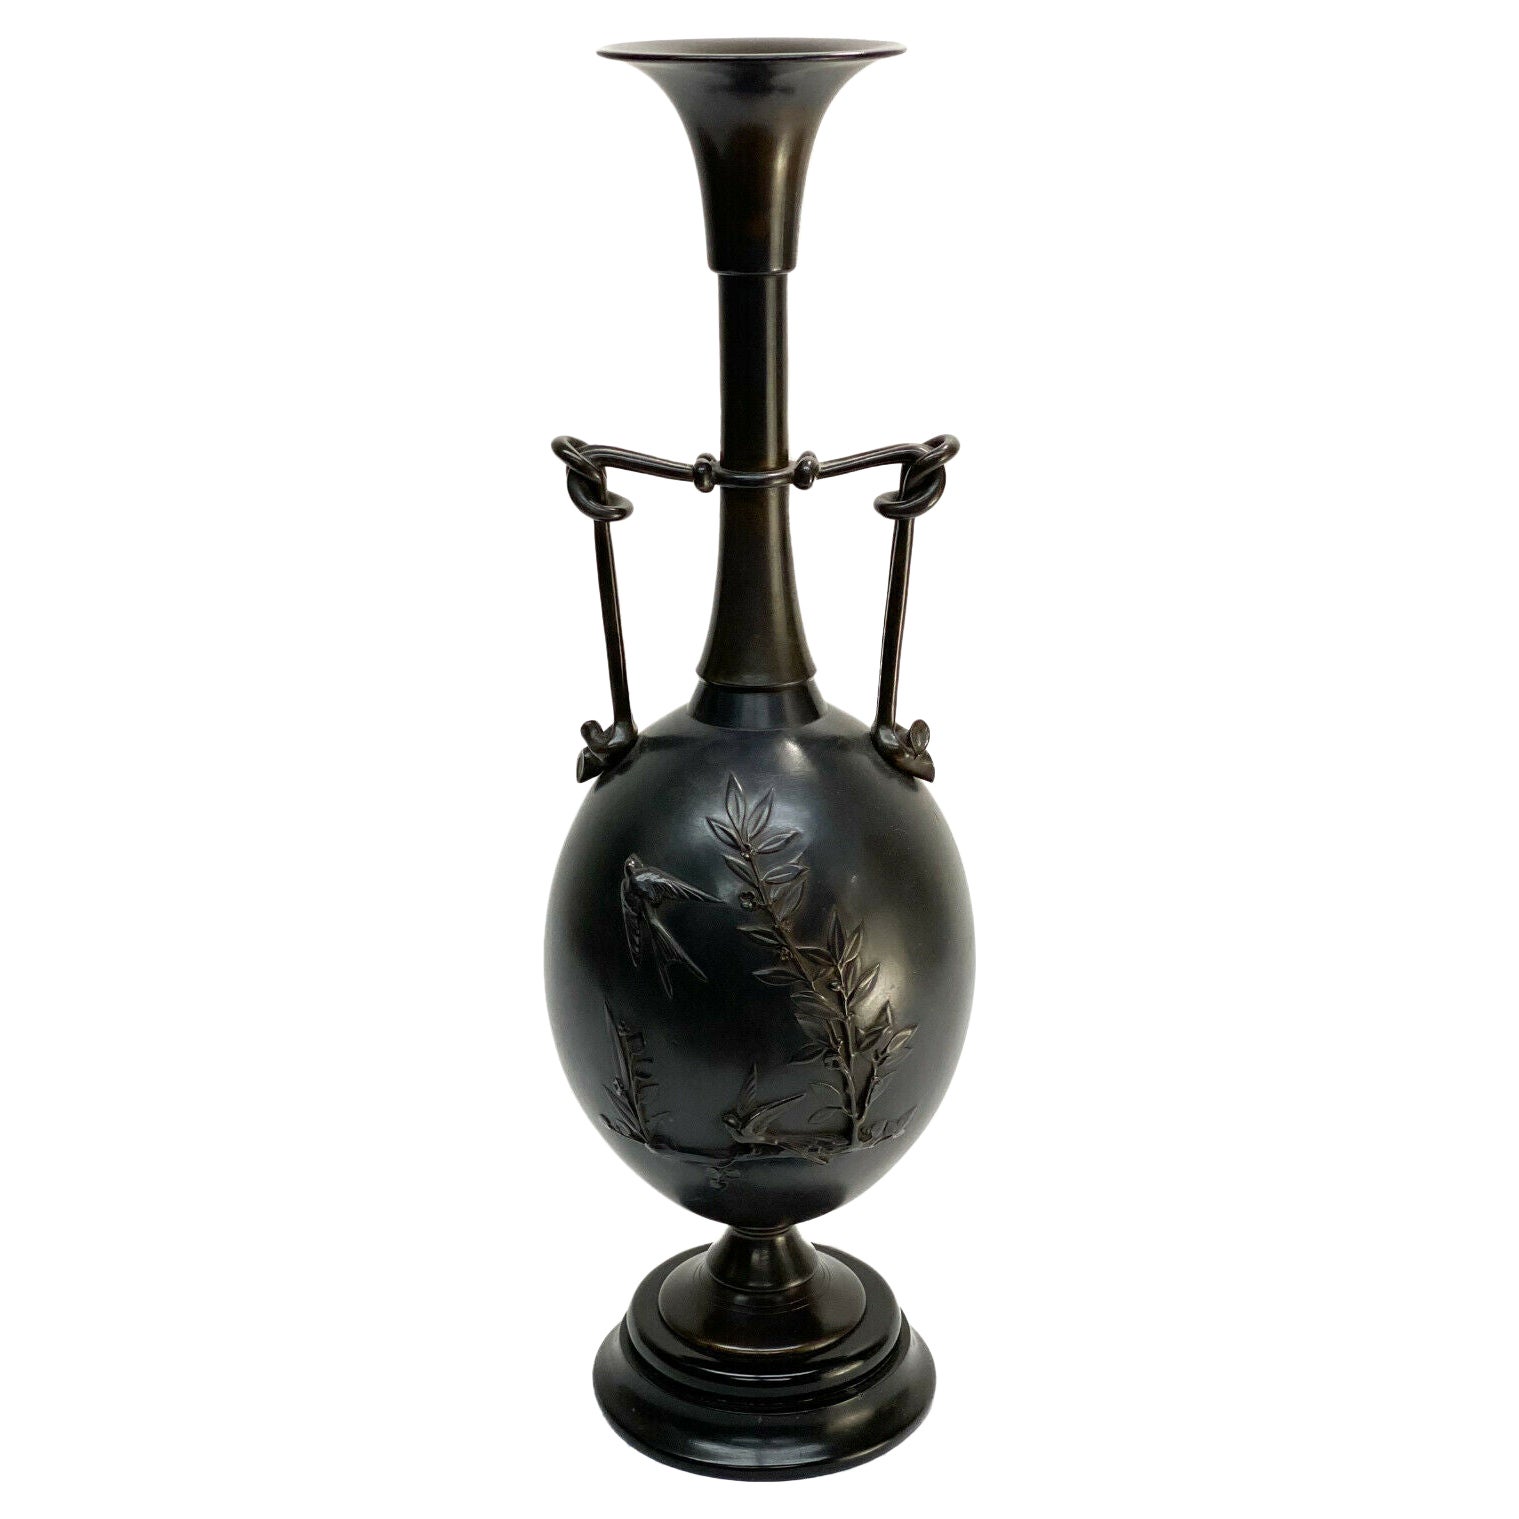 Henry Cahieux Barbedienne French Patinated Bronze Japonism Twin Handled Urn For Sale